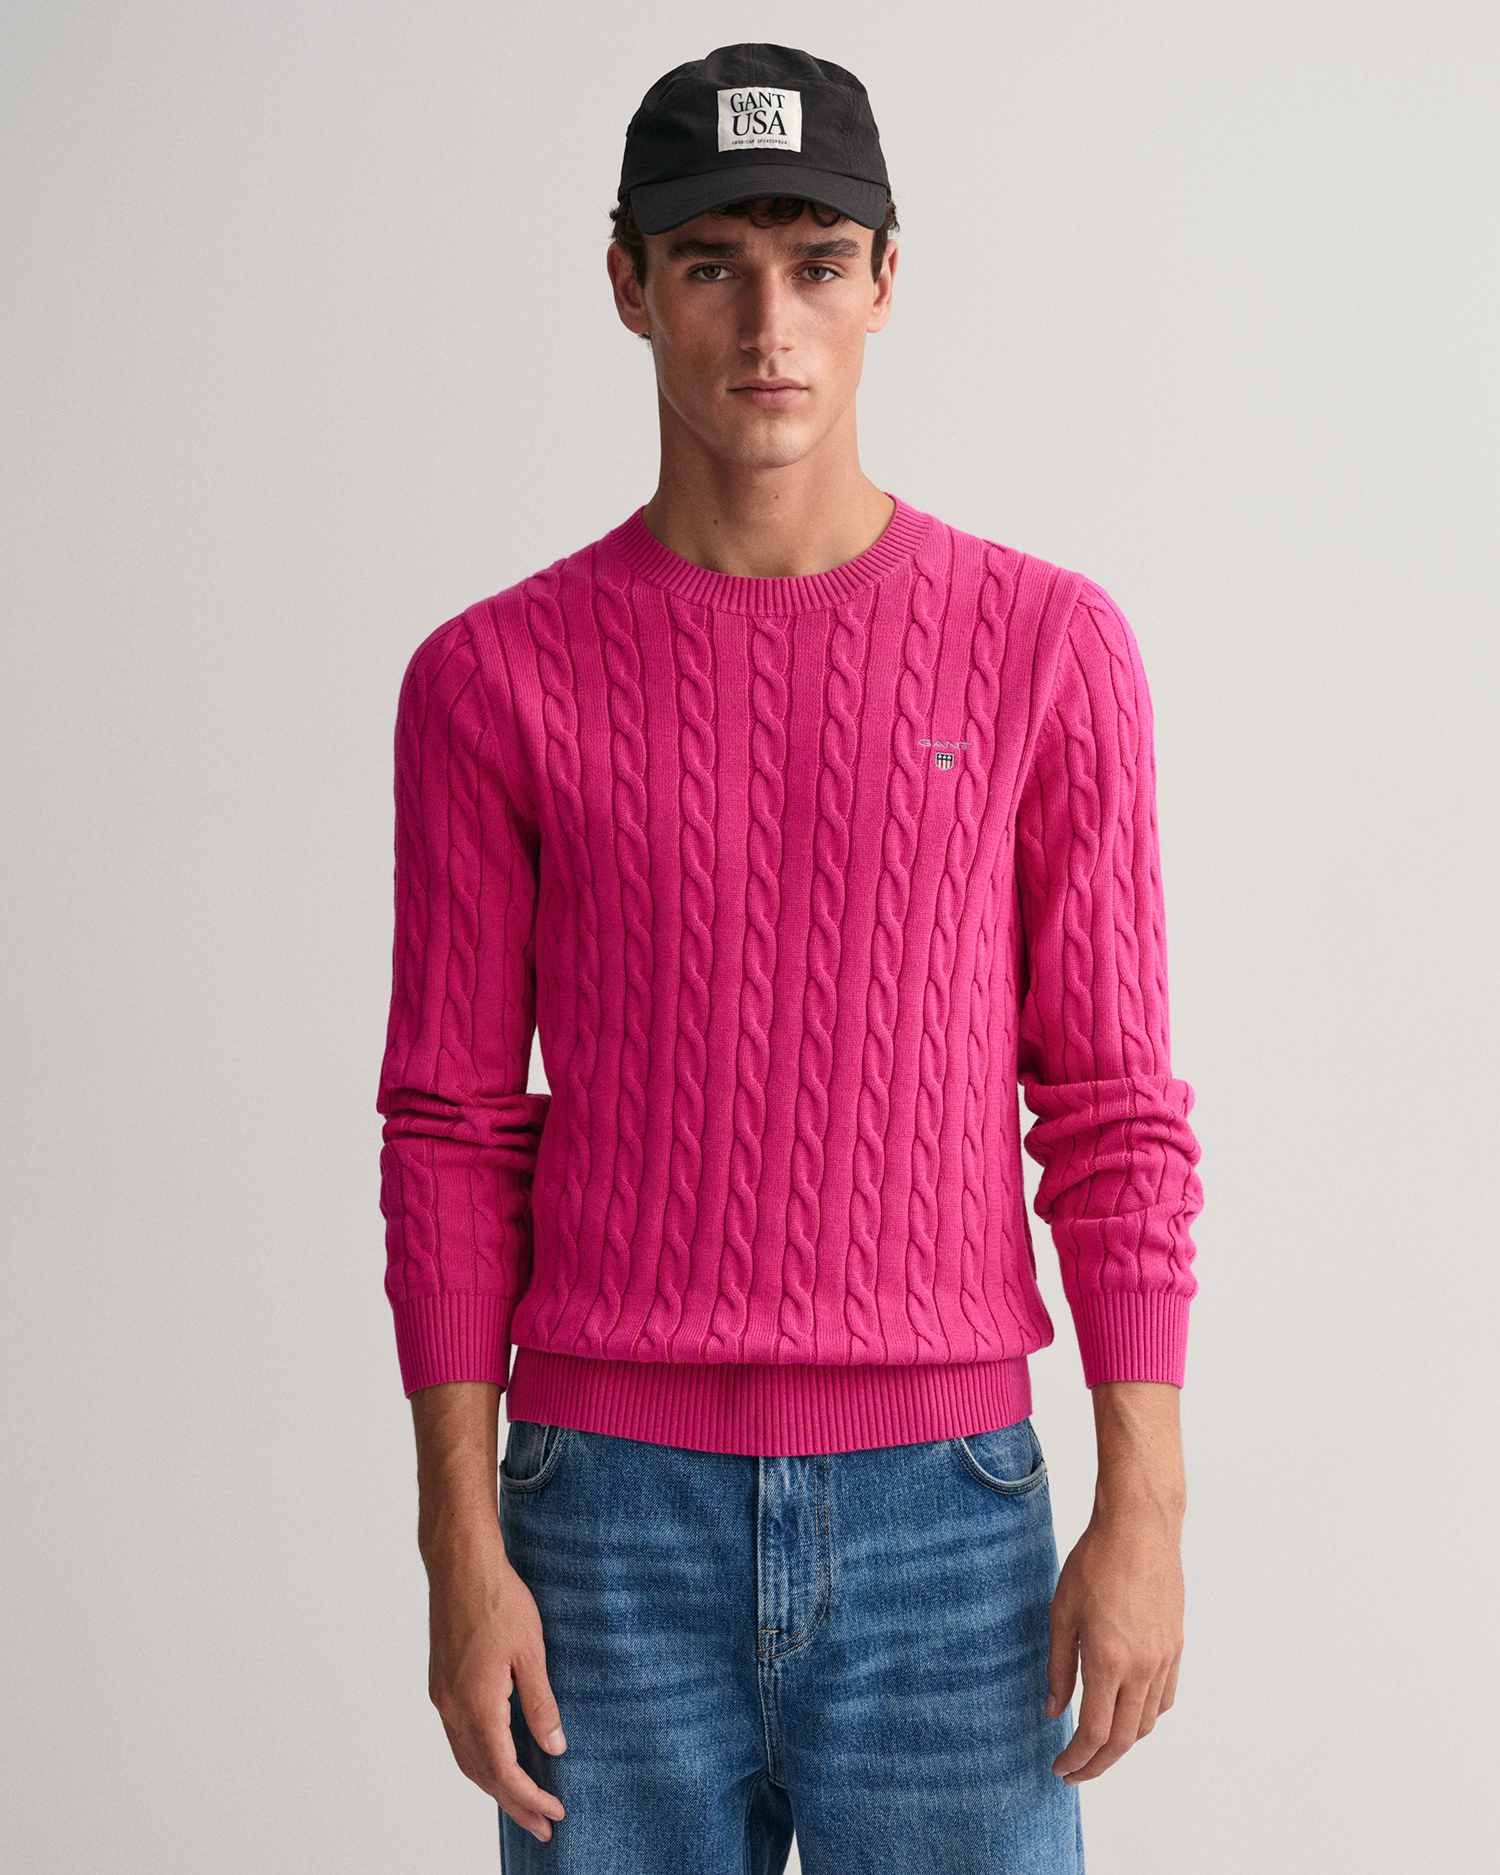 Cable Knit Neck Sweater - GANT